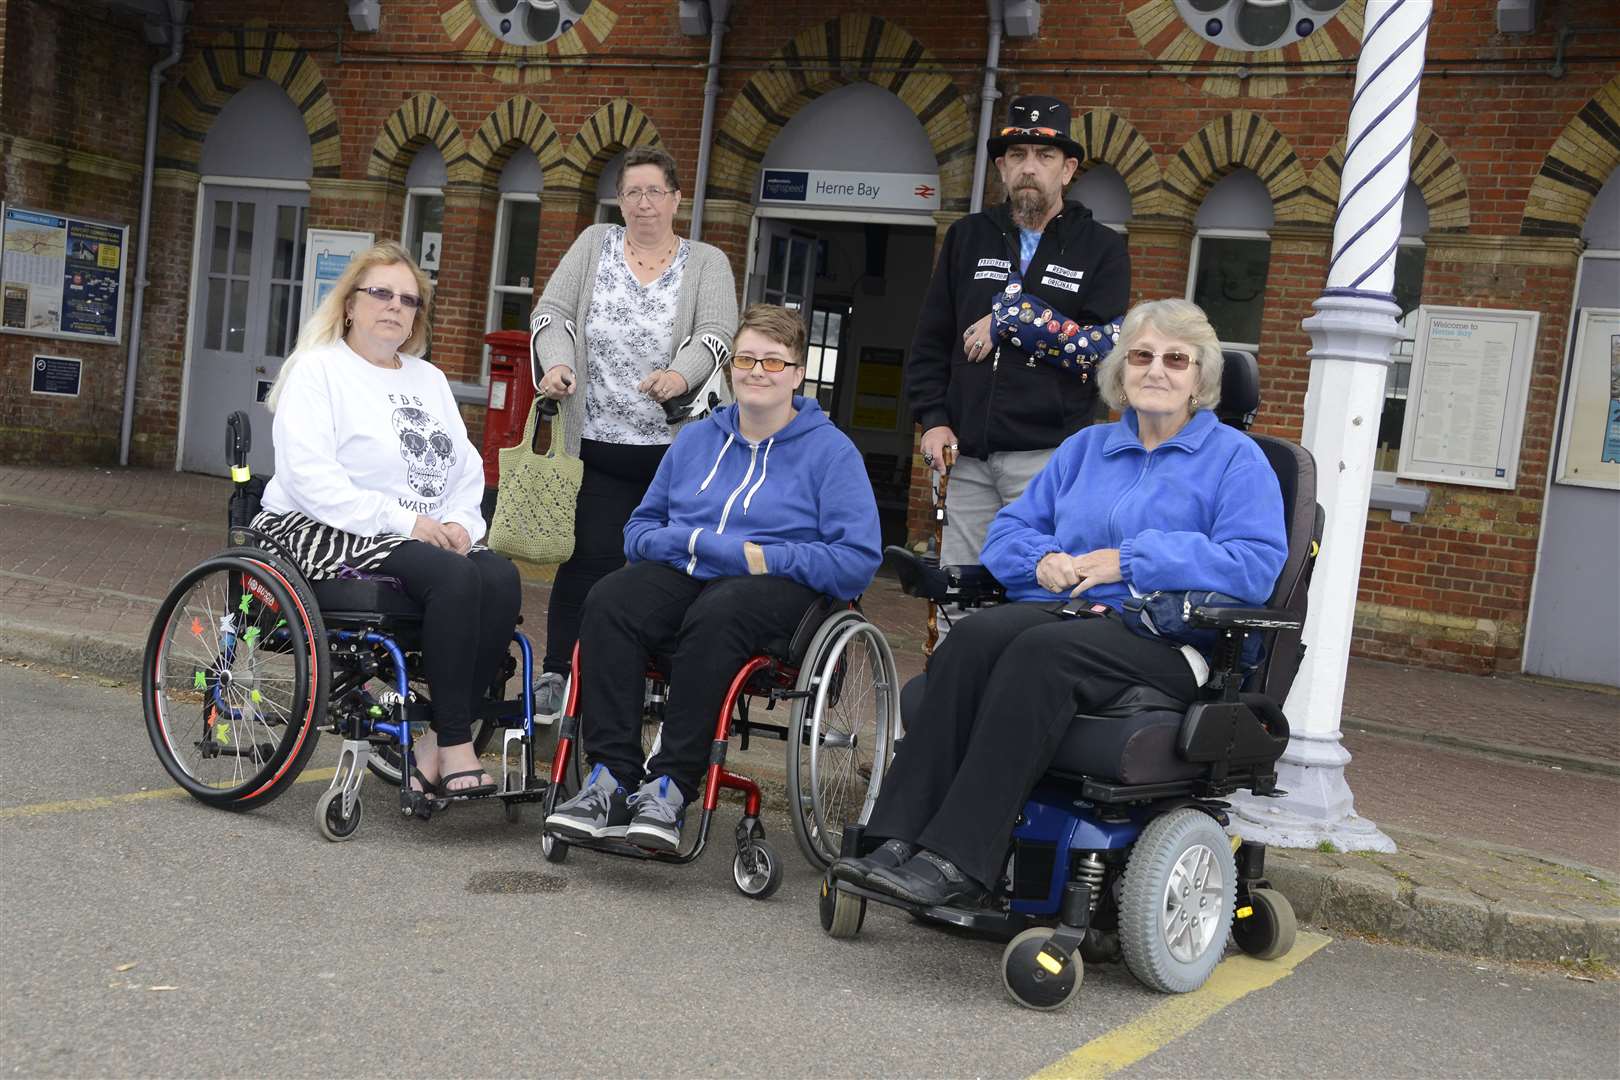 Sheila Appleton (pictured, right) says the scheme will allow disabled passengers to travel from Herne Bay to London freely